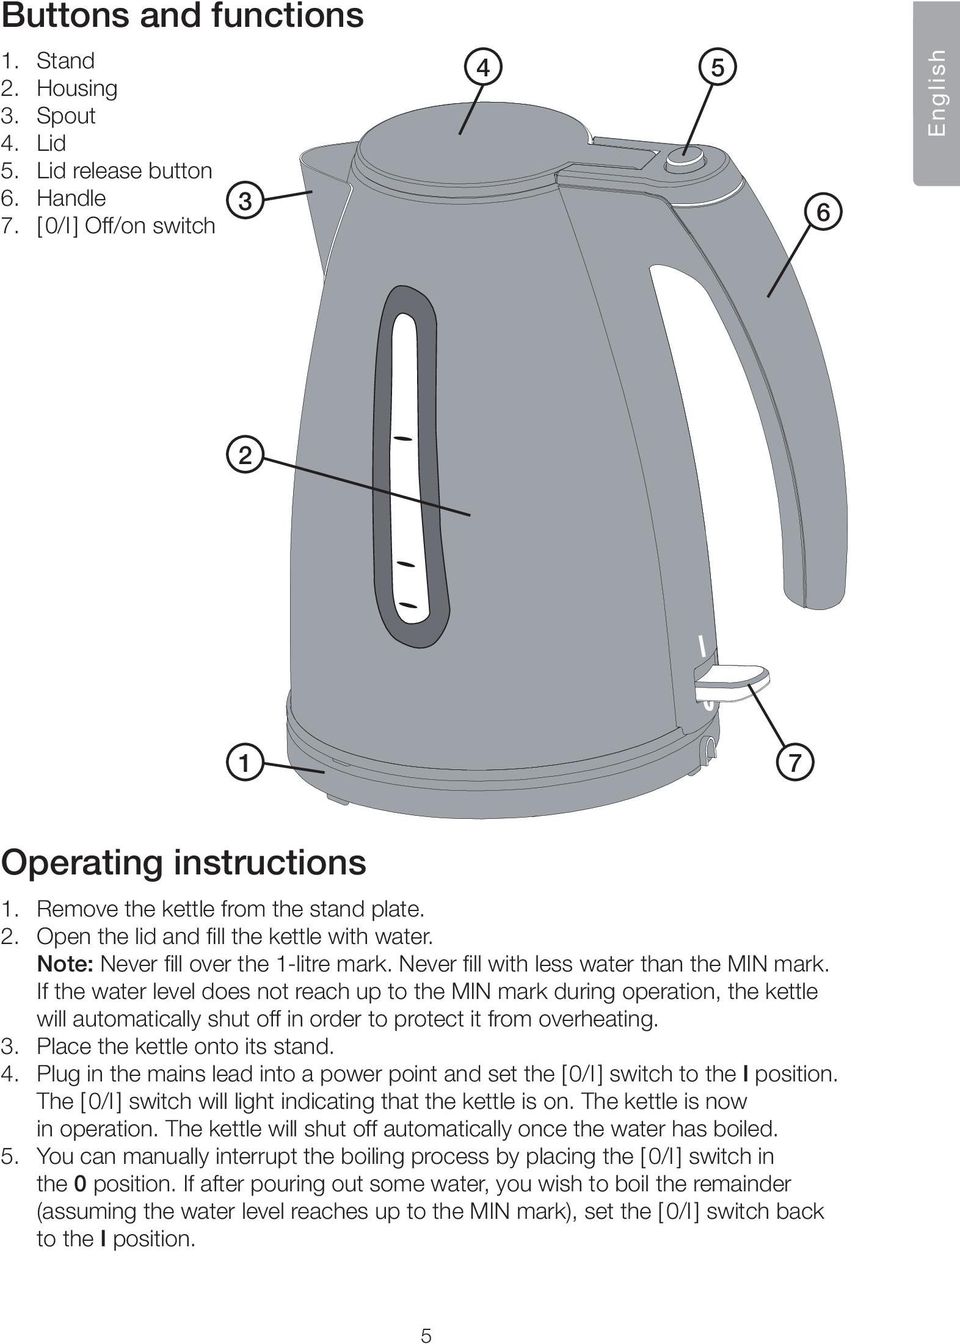 If the water level does not reach up to the MIN mark during operation, the kettle will automatically shut off in order to protect it from overheating. 3. Place the kettle onto its stand. 4.